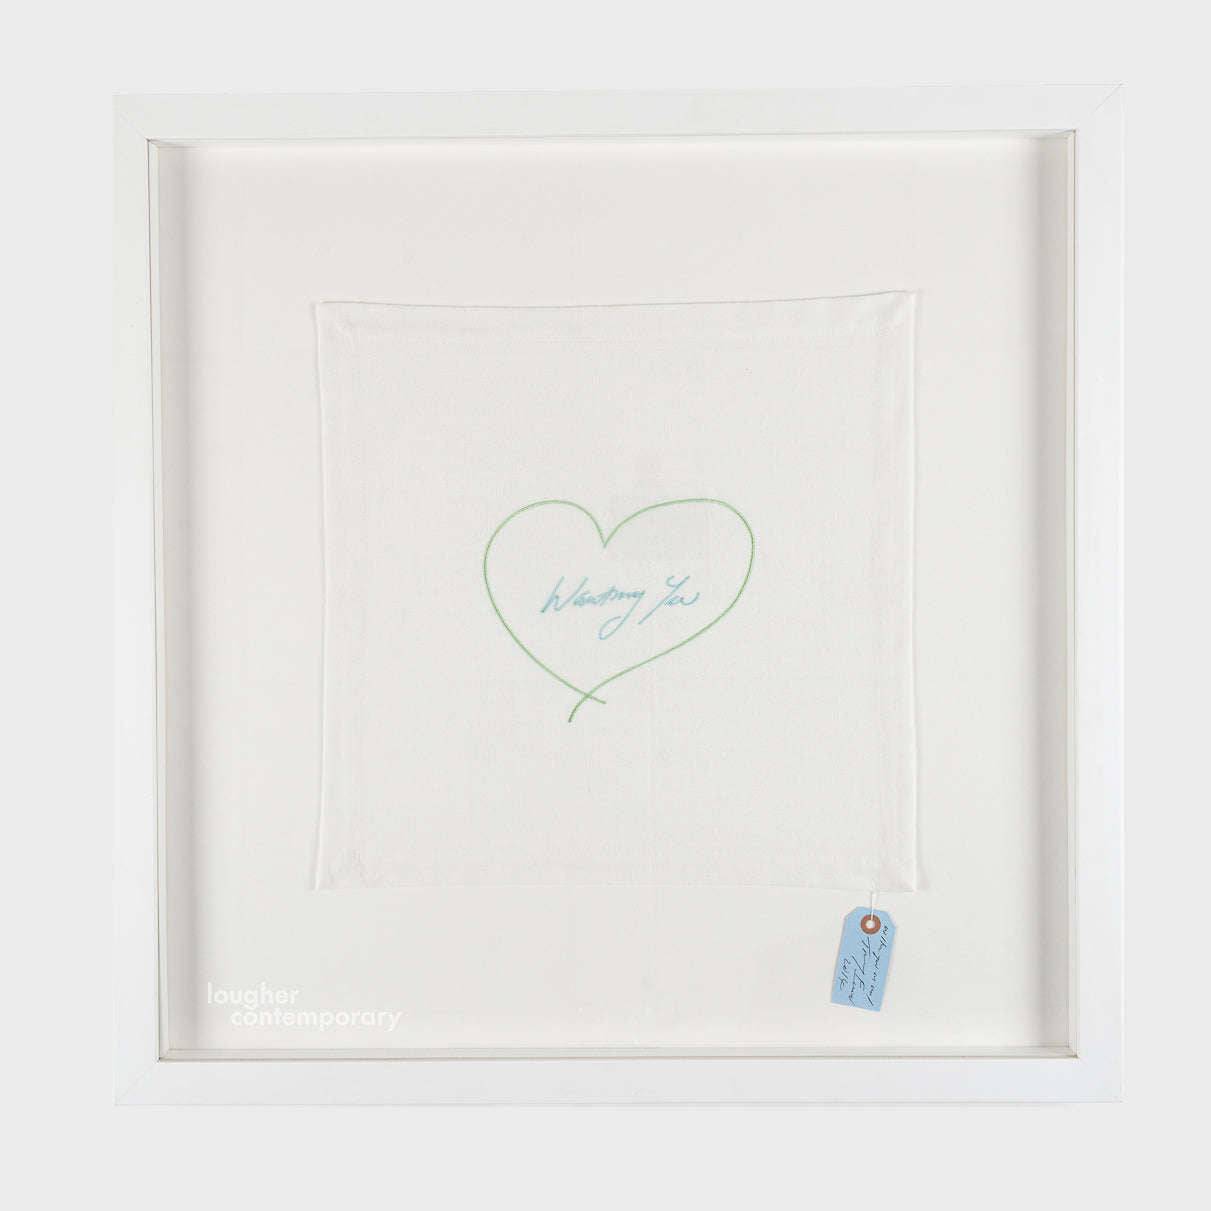 Tracey Emin, Wanting You (Green and Blue), 2014 For Sale - Lougher Contemporary